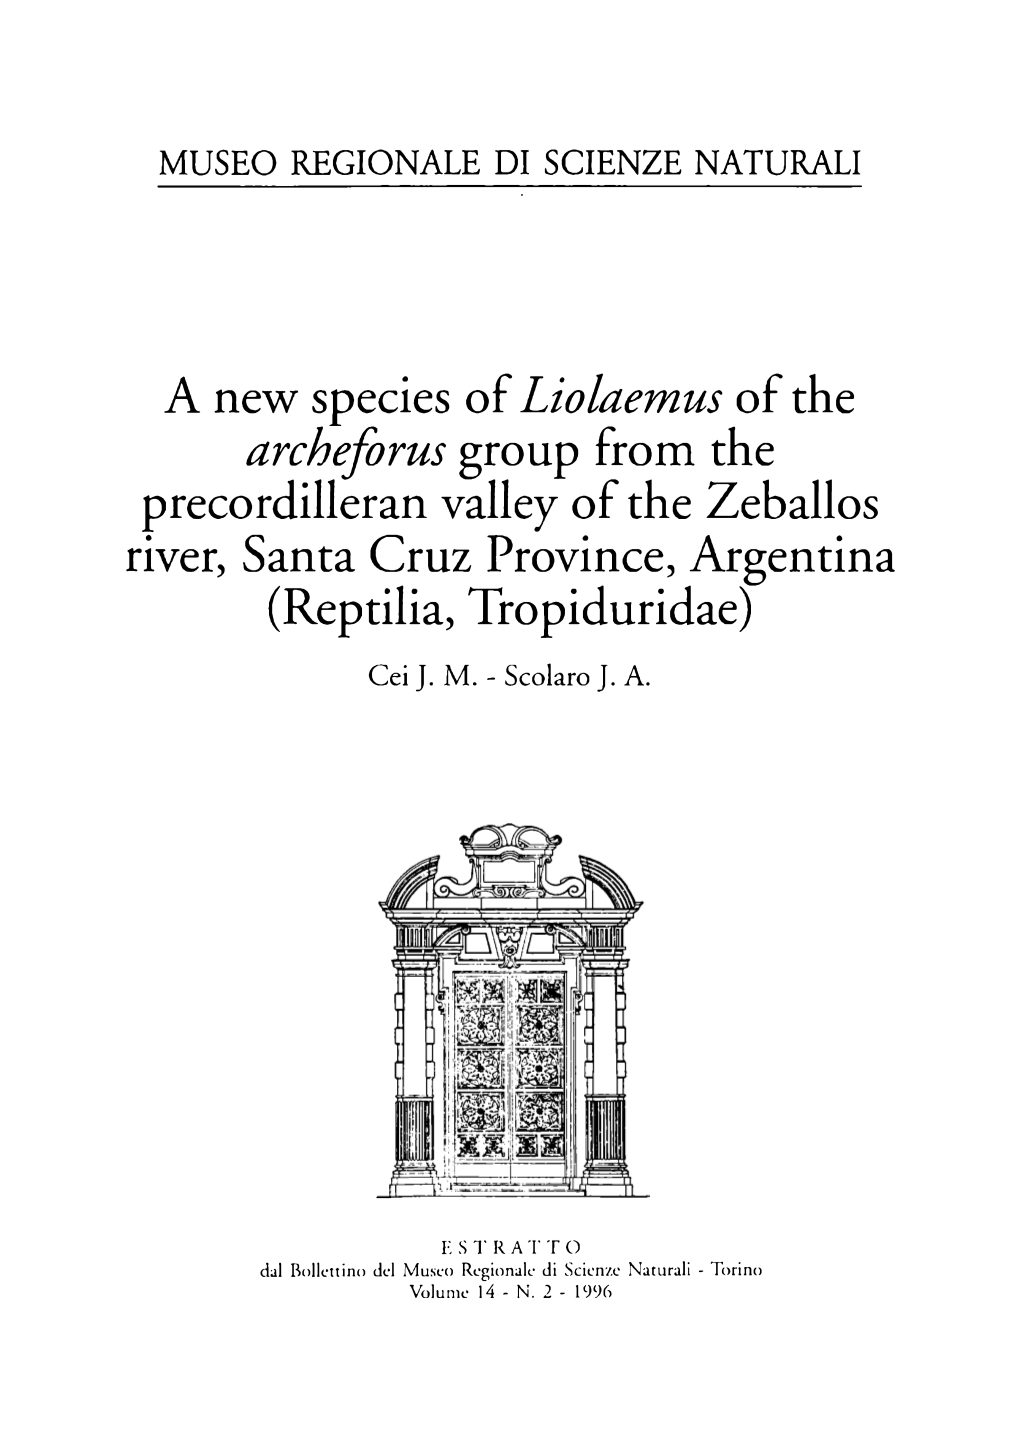 A New Species Ofliolaemus of the Archeforus Group from the River, Santa Cruz Province, Argentina